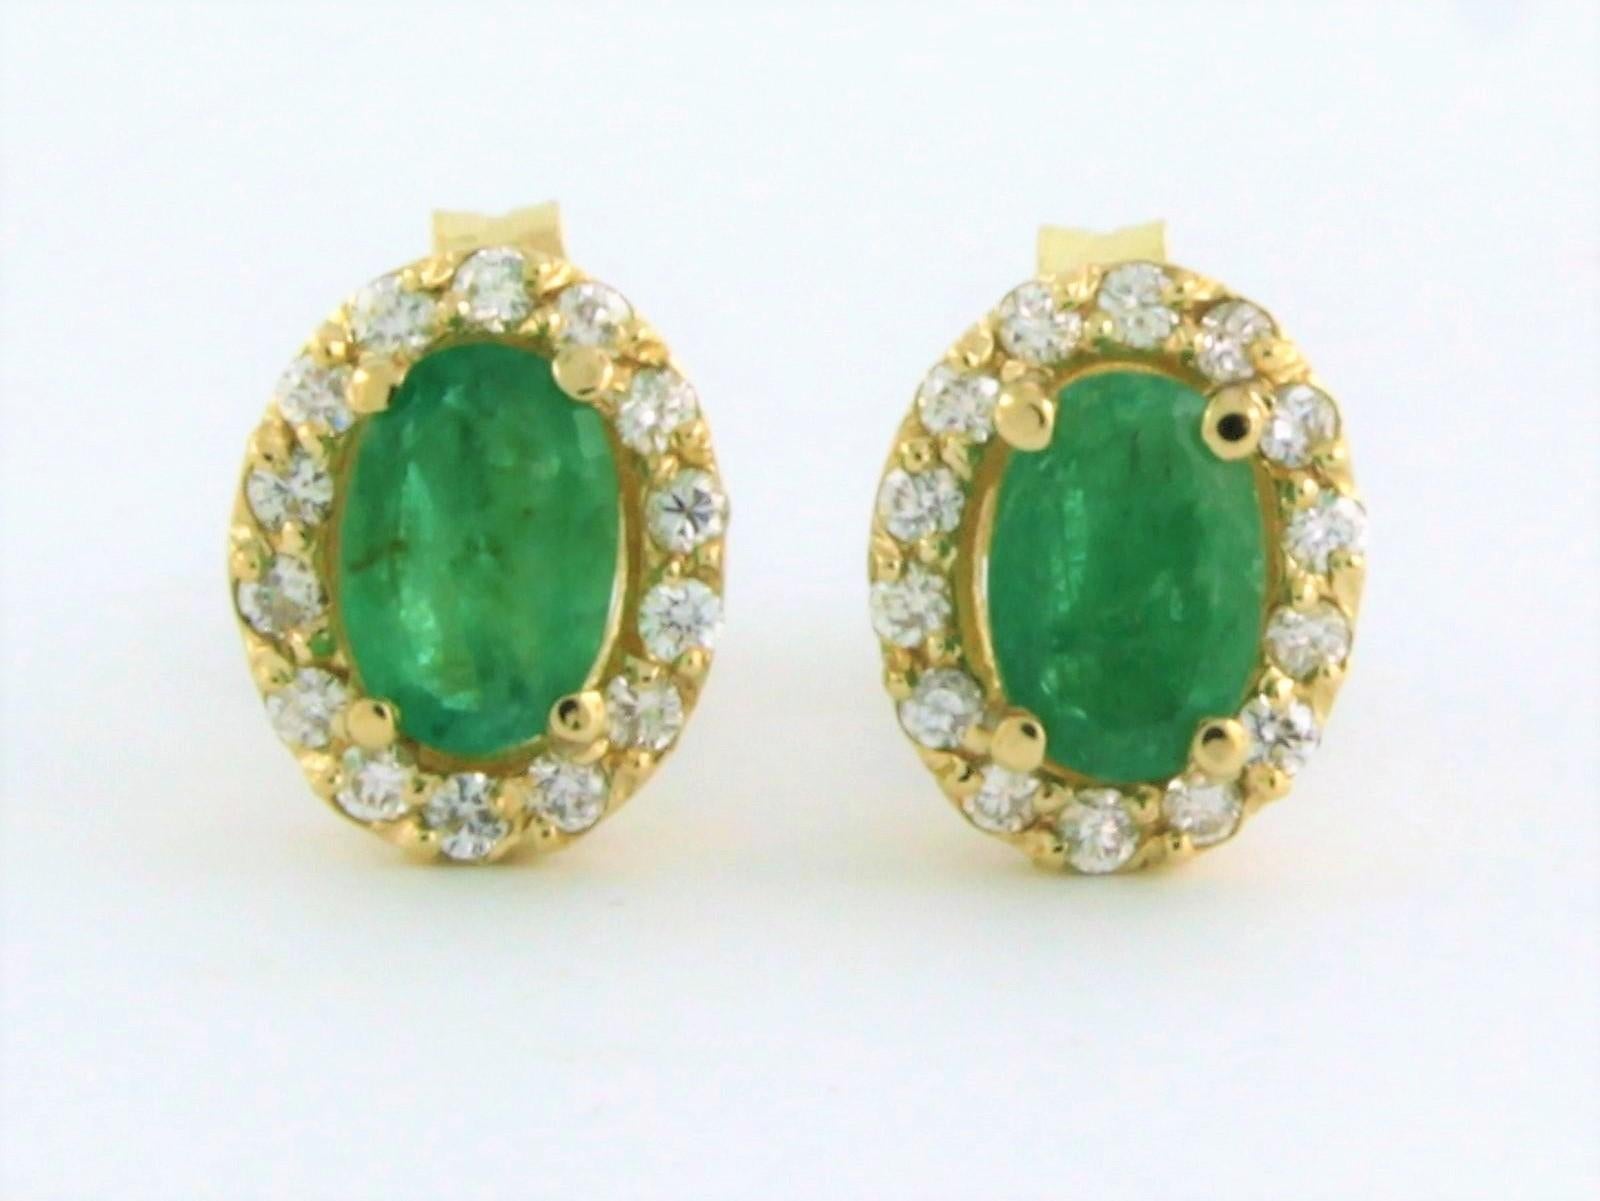 14k yellow gold entourage earrings set with emerald and brilliant cut diamonds. 0.22ct - F/G - VS/SI

detailed description

the size of the ear stud is 9.1 mm long by 7.4 mm wide

weight 2.2 grams

set with

- 2 x 6.0 mm x 4.0 mm oval cabochon cut